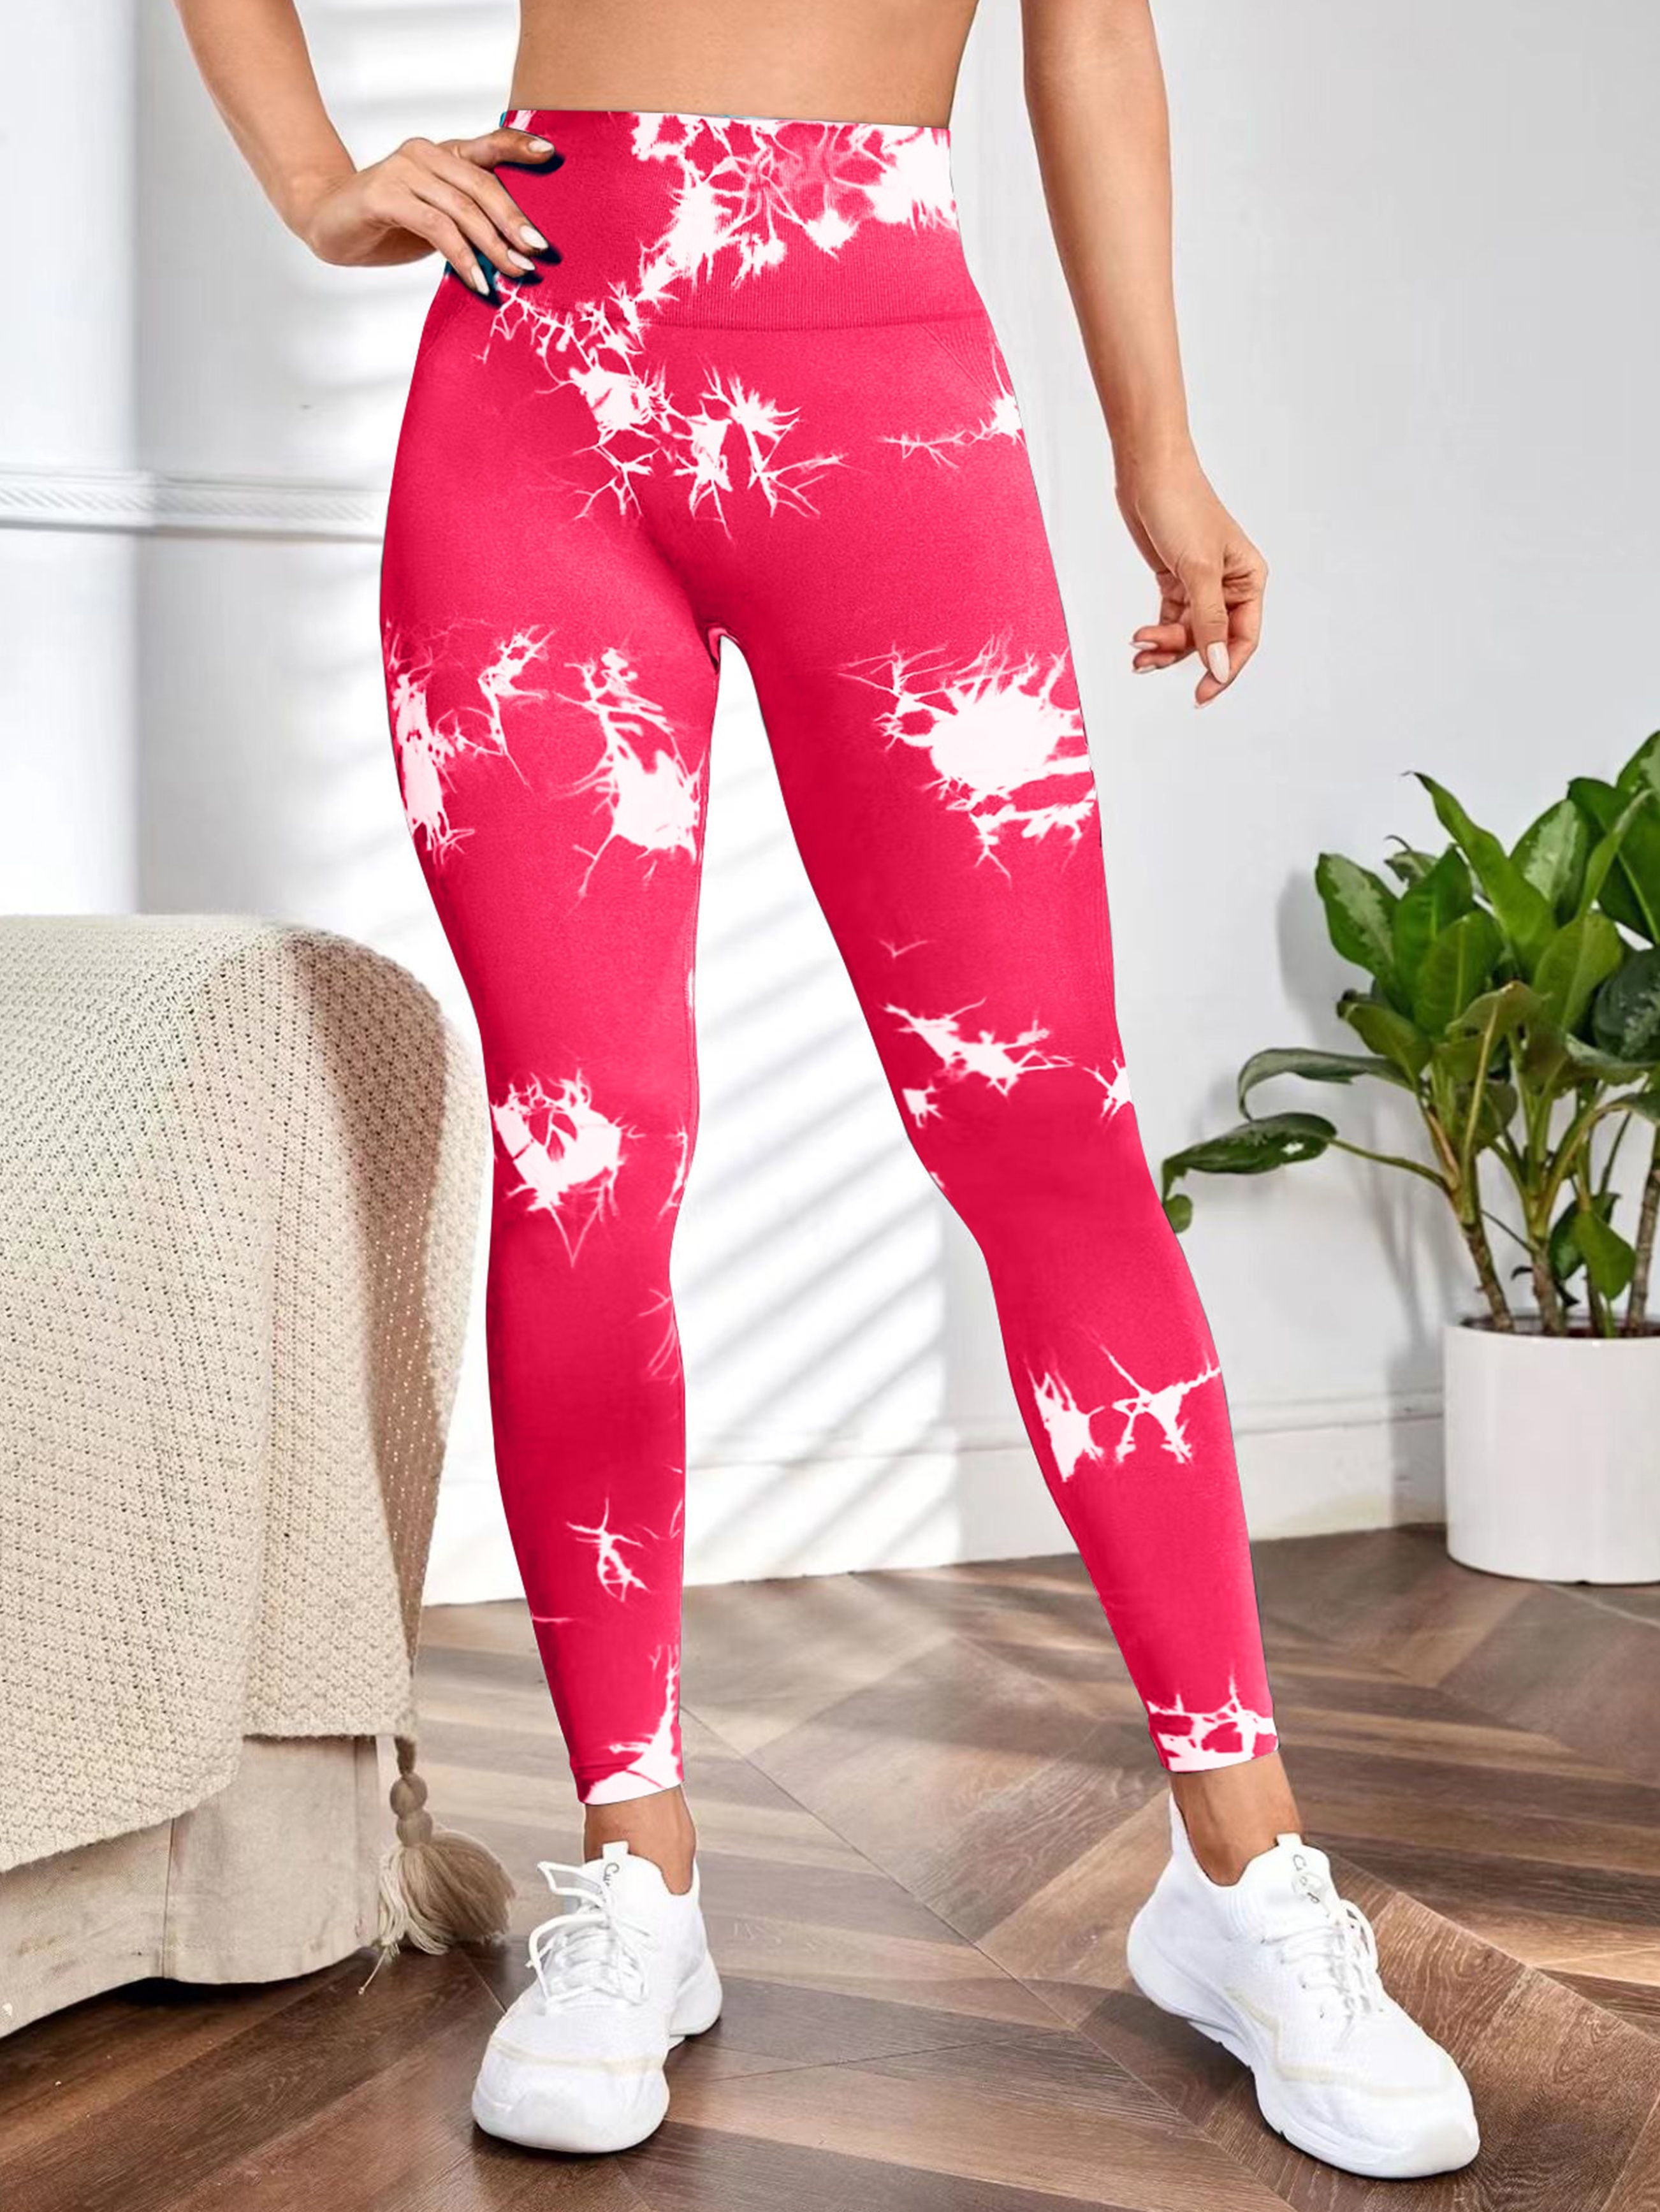 Ice Cream White Pink Chocolate Cherry High Waist Yoga Pants for Women  Sports Leggings 7/8 Length Yoga Pants X-Small, Multicolor, X-Small/11  Inseam : : Clothing, Shoes & Accessories